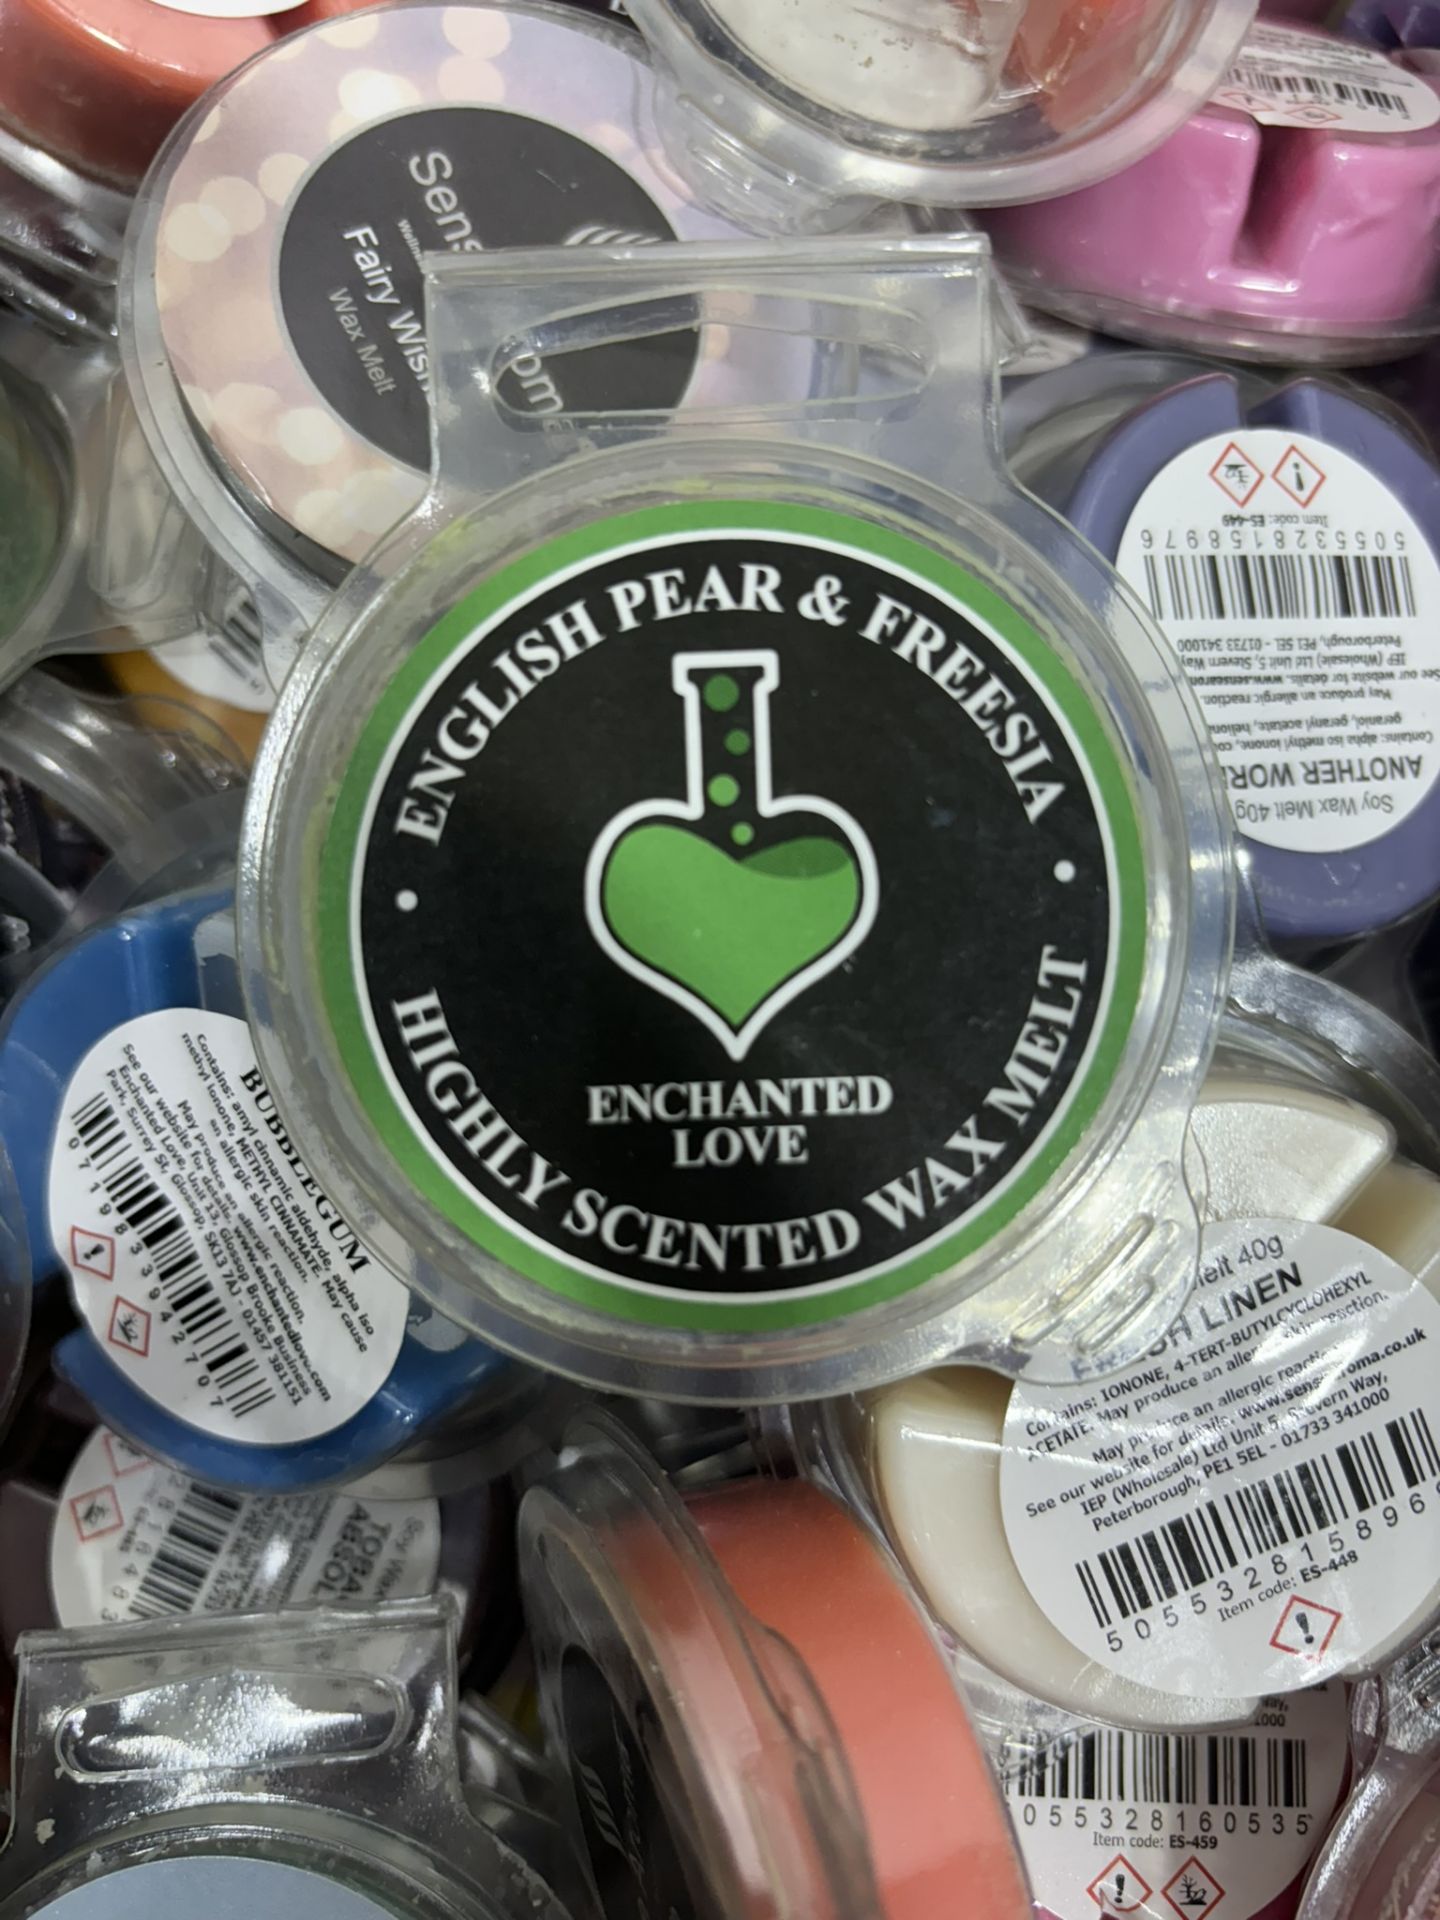 Large Quantity Of Various Scented Sense Aroma & Enchanted Love Wax Melts - Image 6 of 8